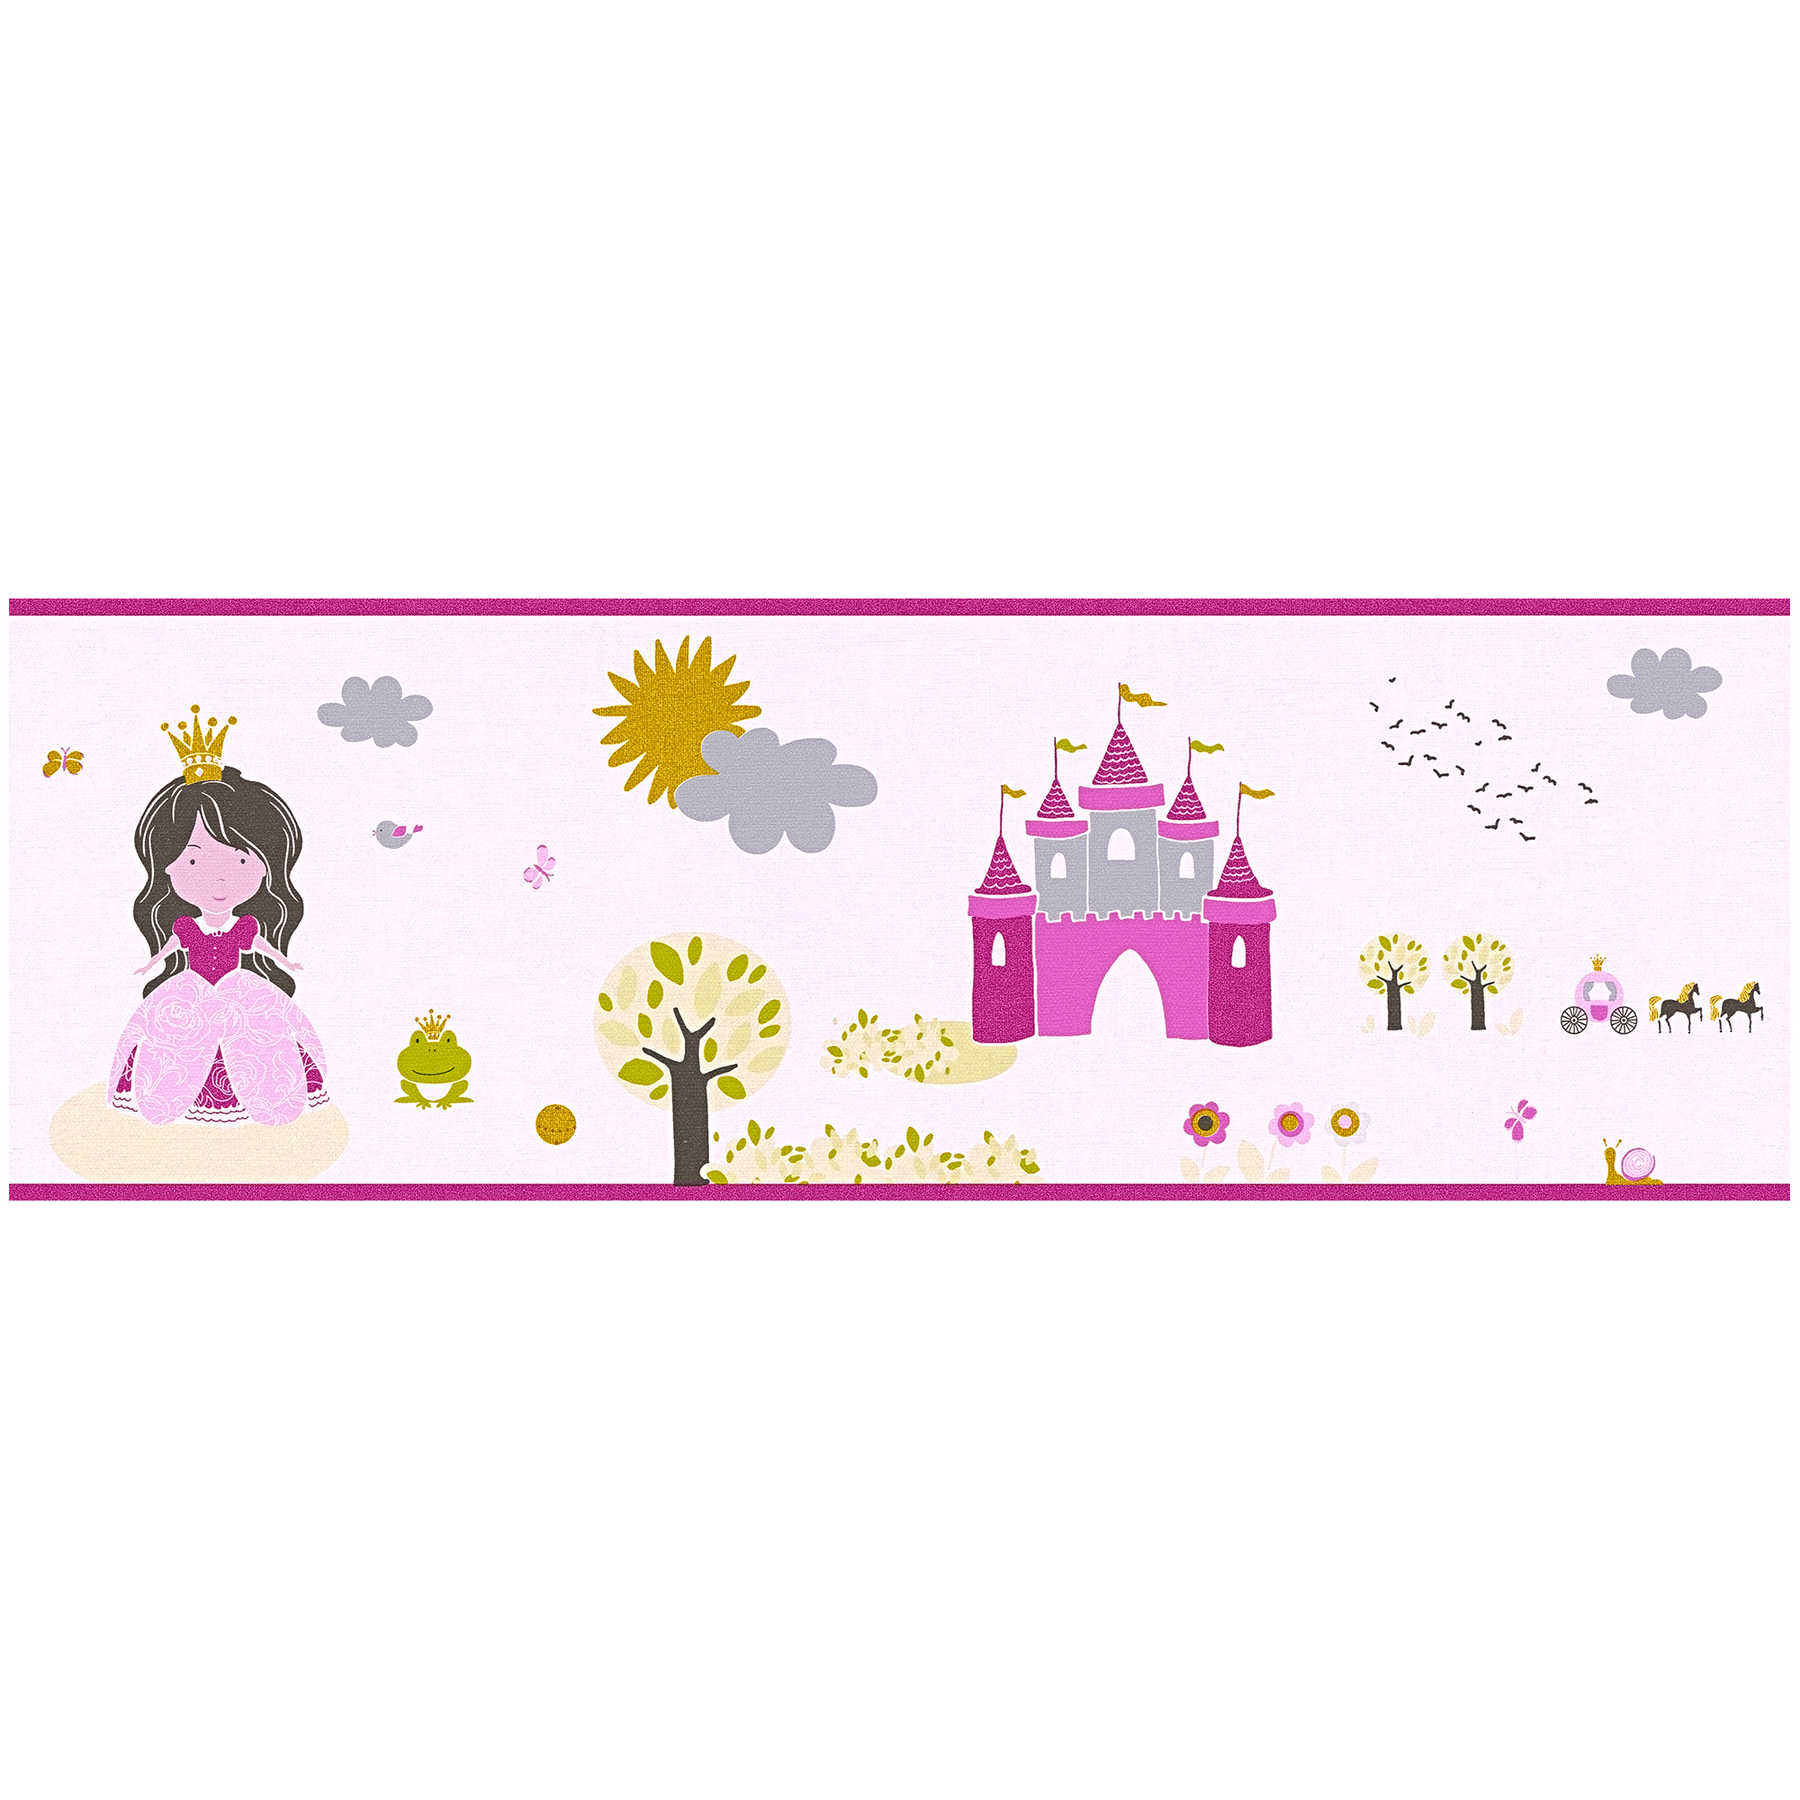         Nursery border with fairy tale motif - Colorful, Pink
    